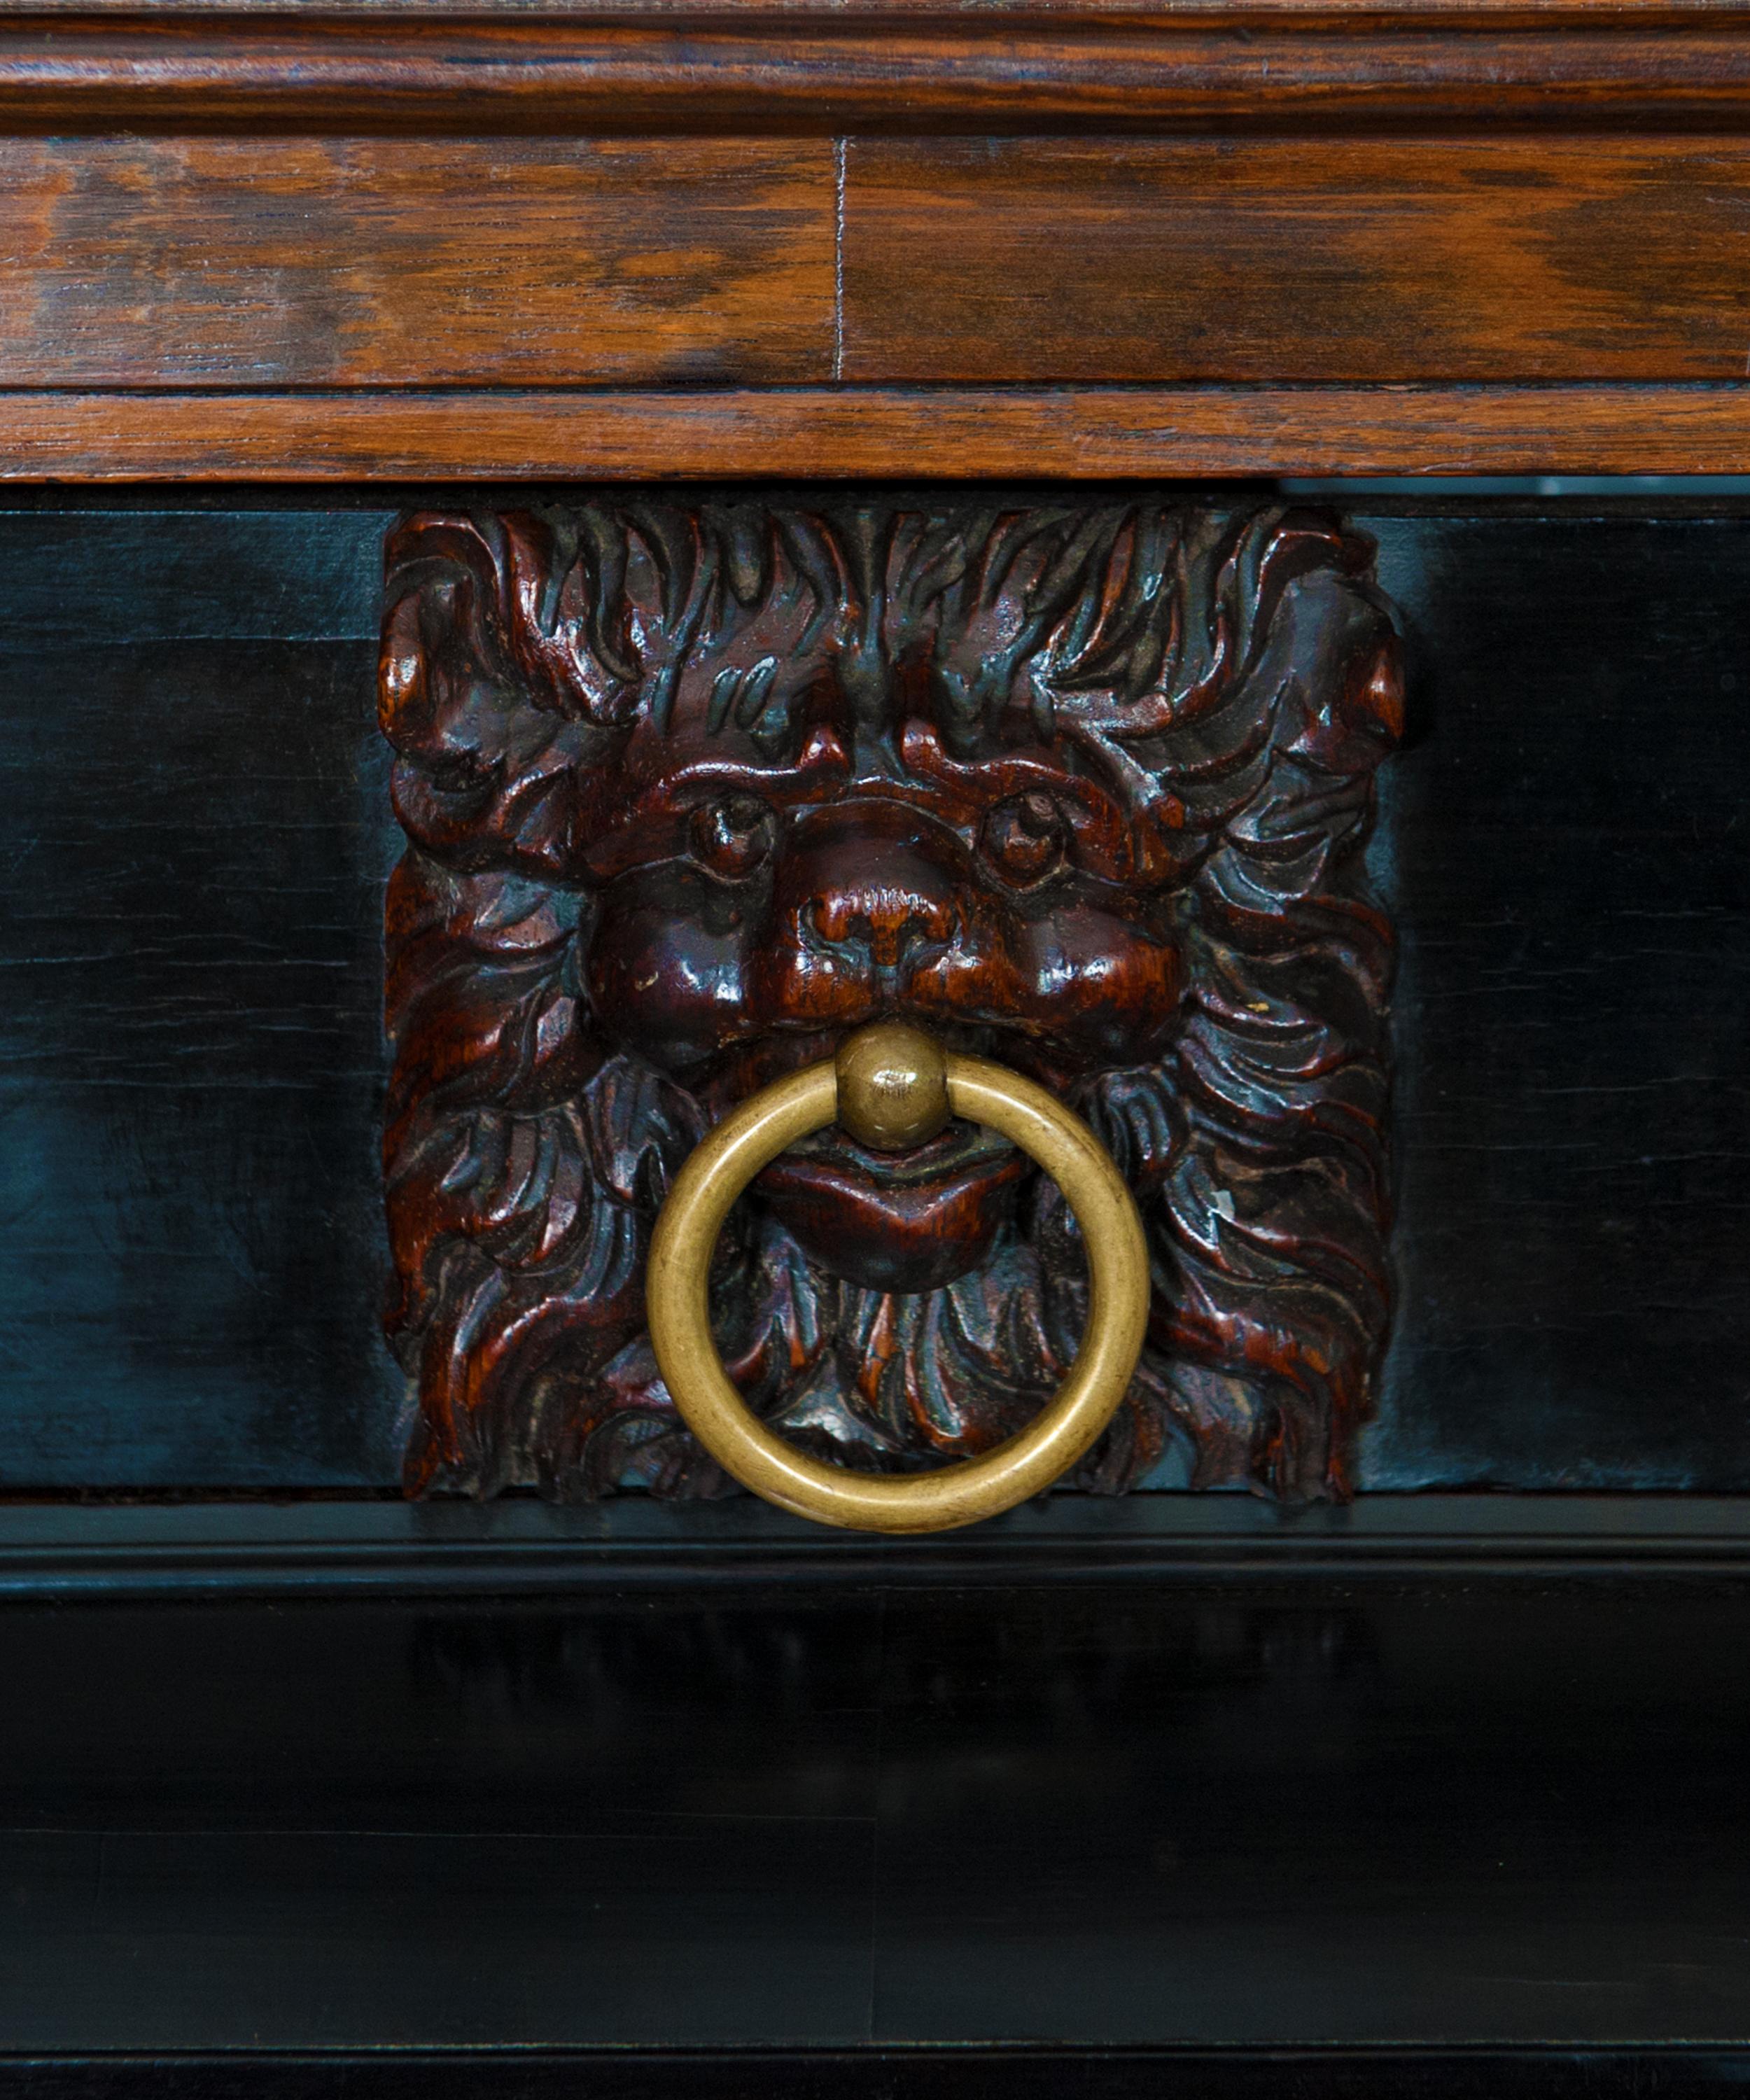 Baroque Rare Dutch 17th Century Cabinet-on-Stand, A So-Called “Kraamkamerkast” For Sale